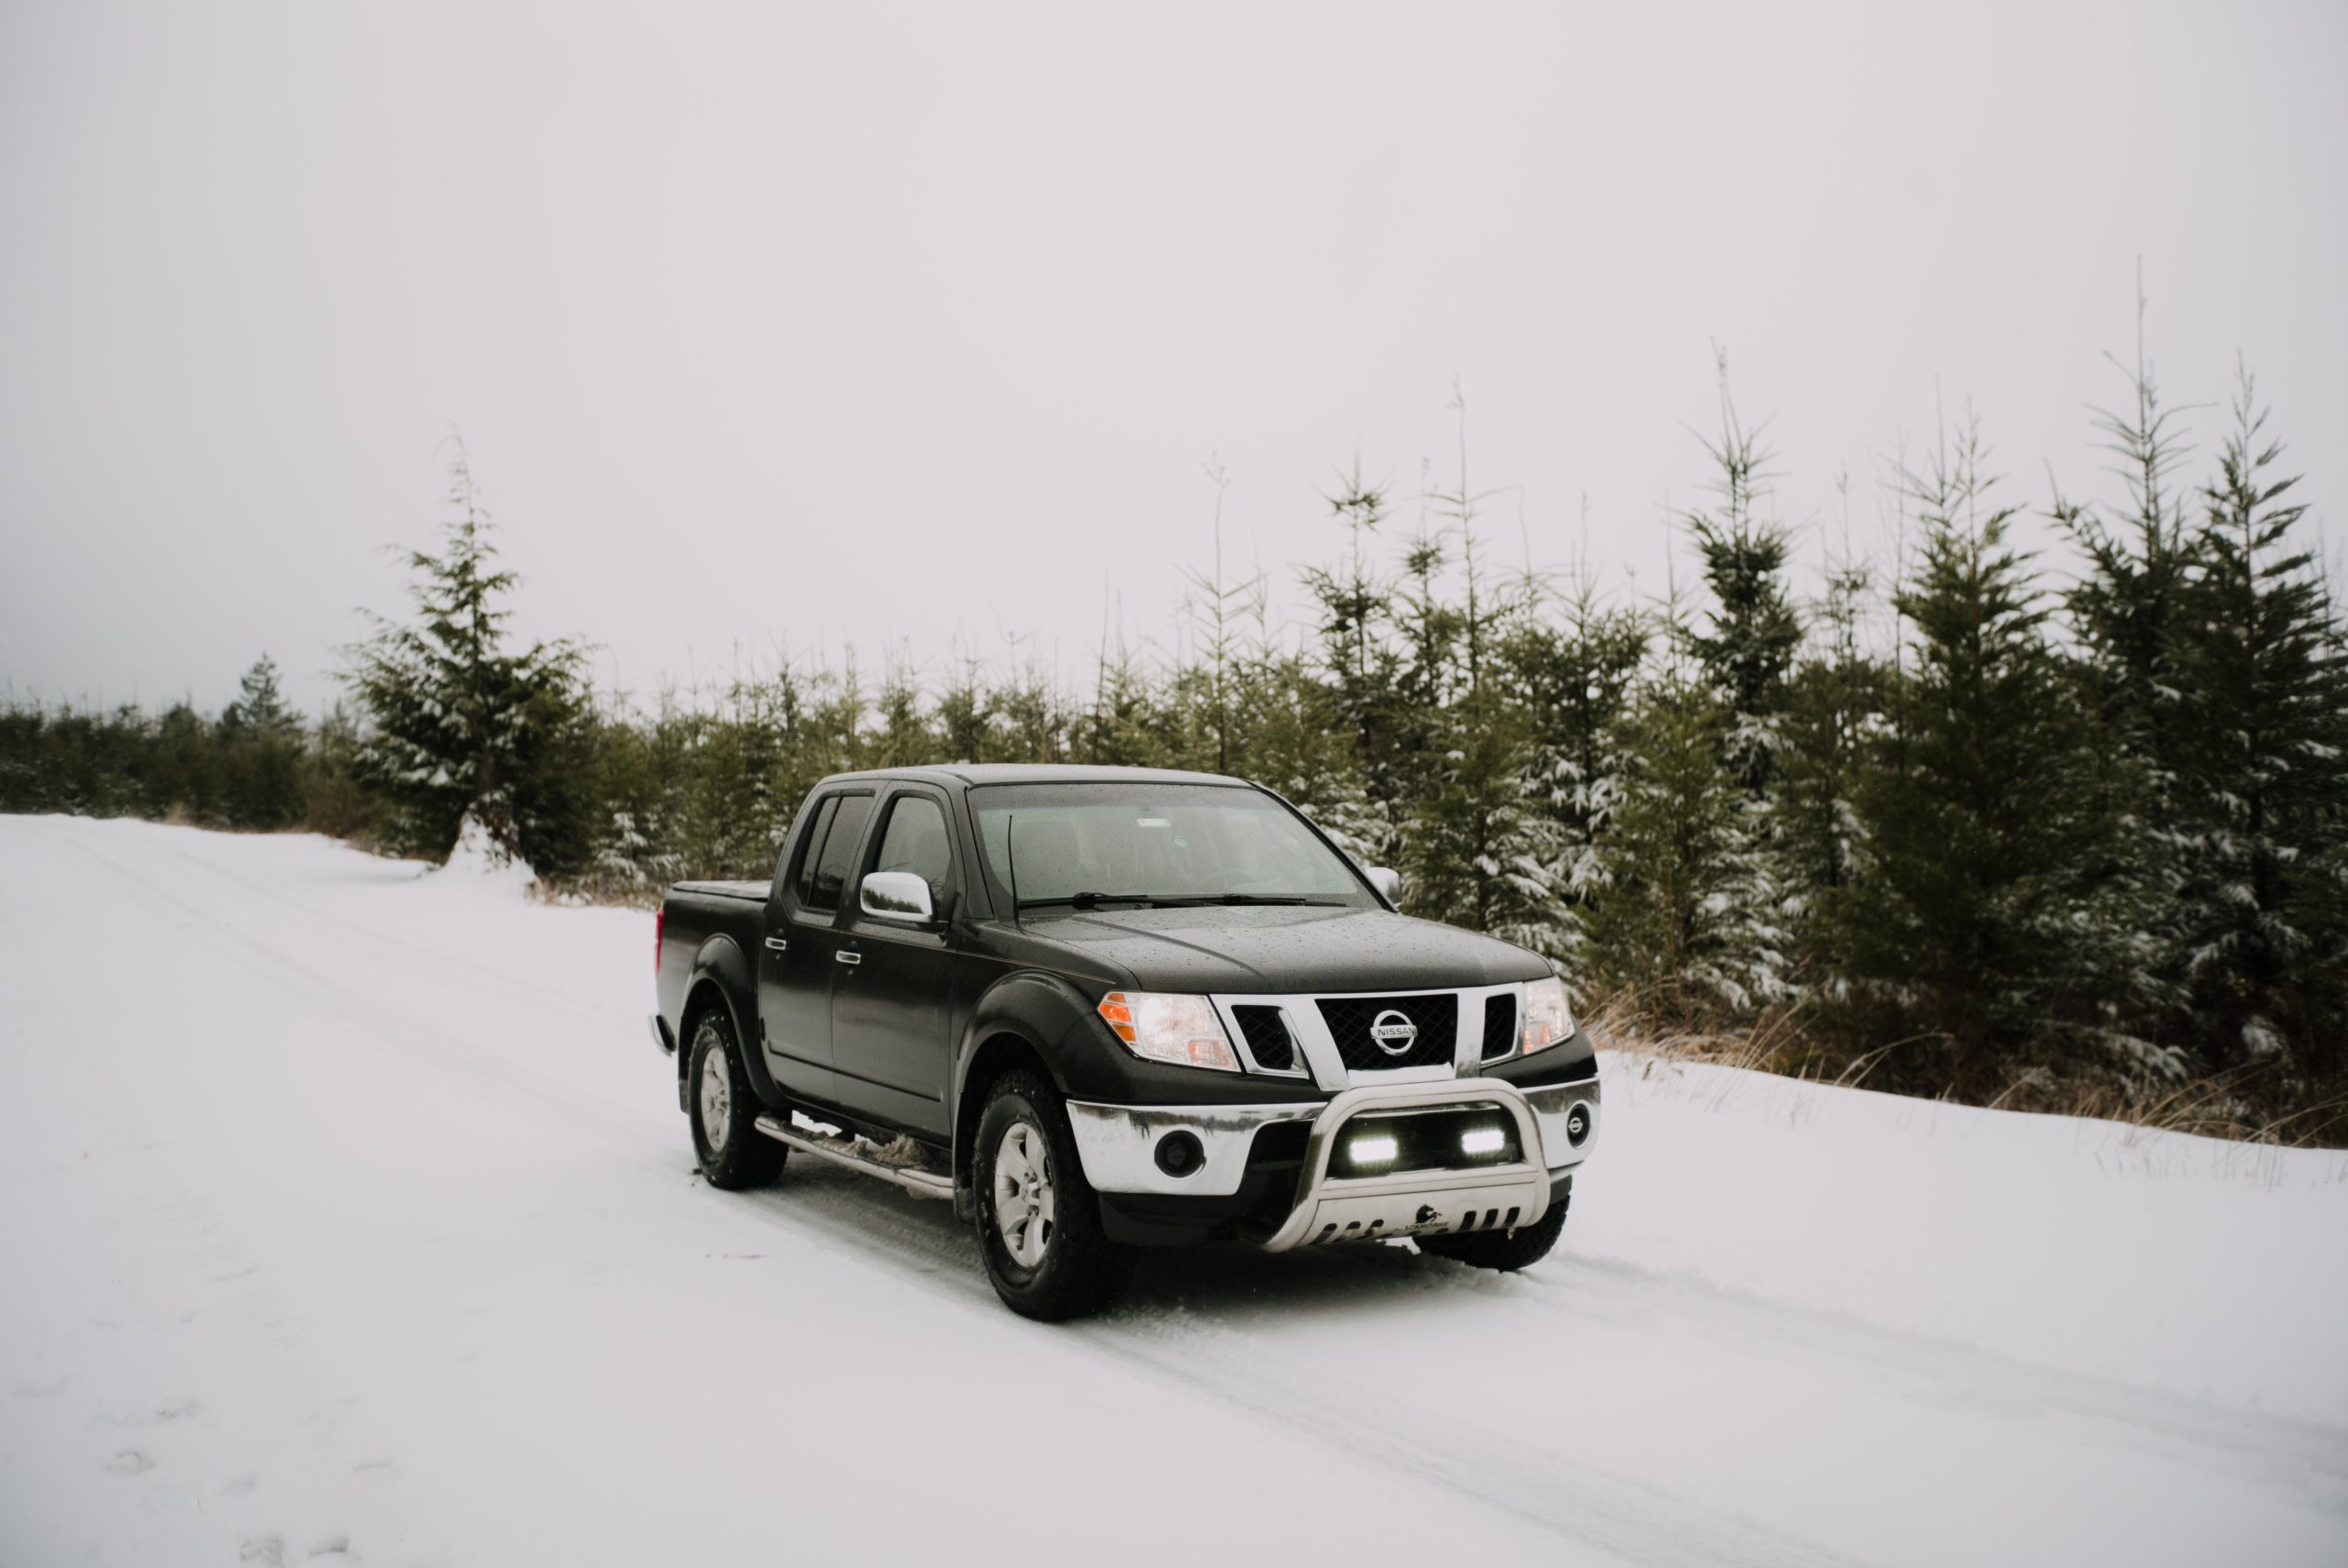 Top Tips for Driving in Winter Weather